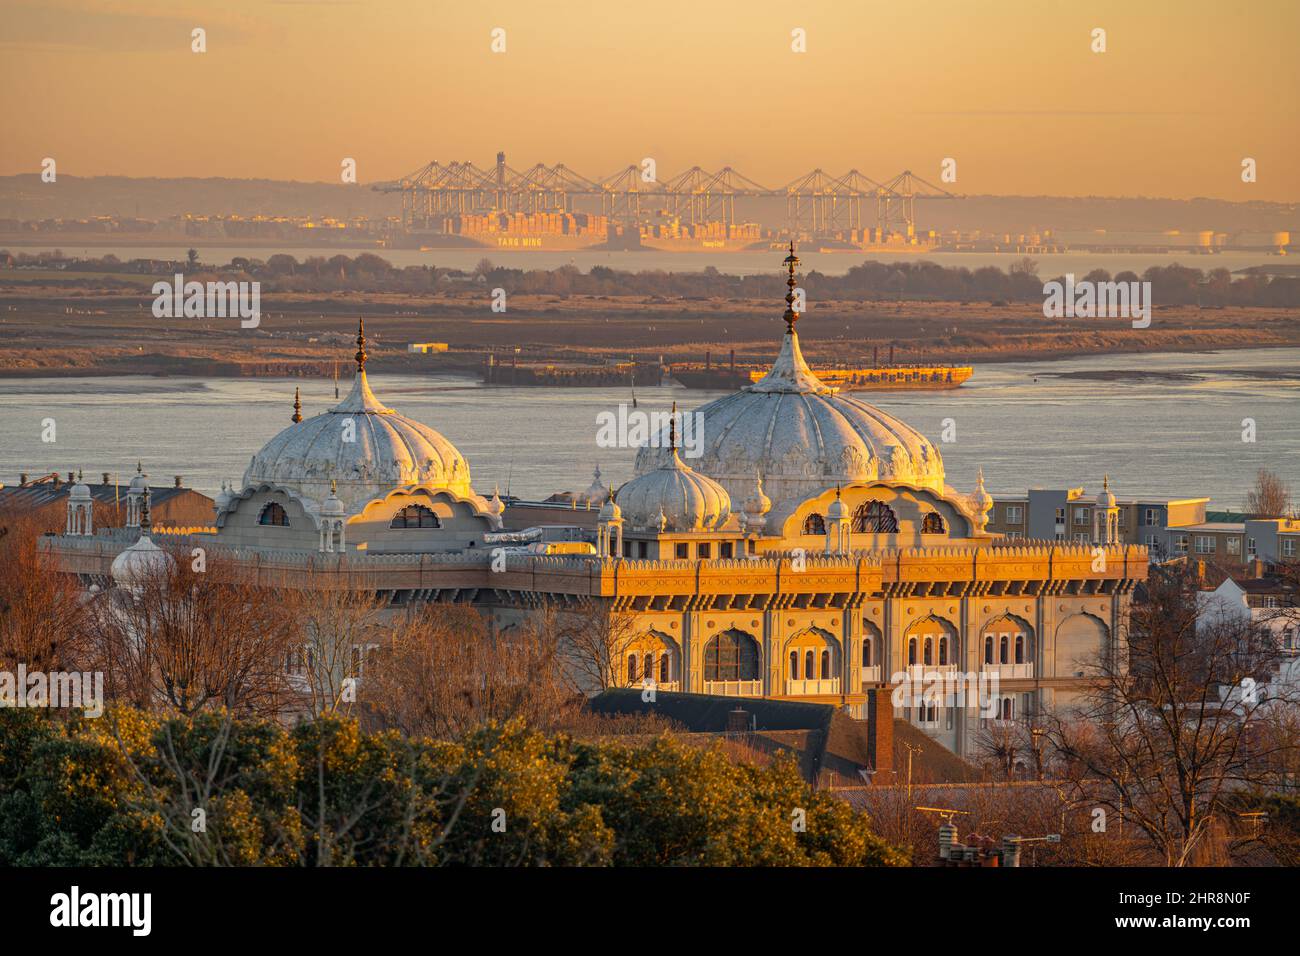 Looking towards Thames Gateway port with the domes of the  Guru Nanak Darbar Gurdwara in Gravesend in foreground at dawn Stock Photo